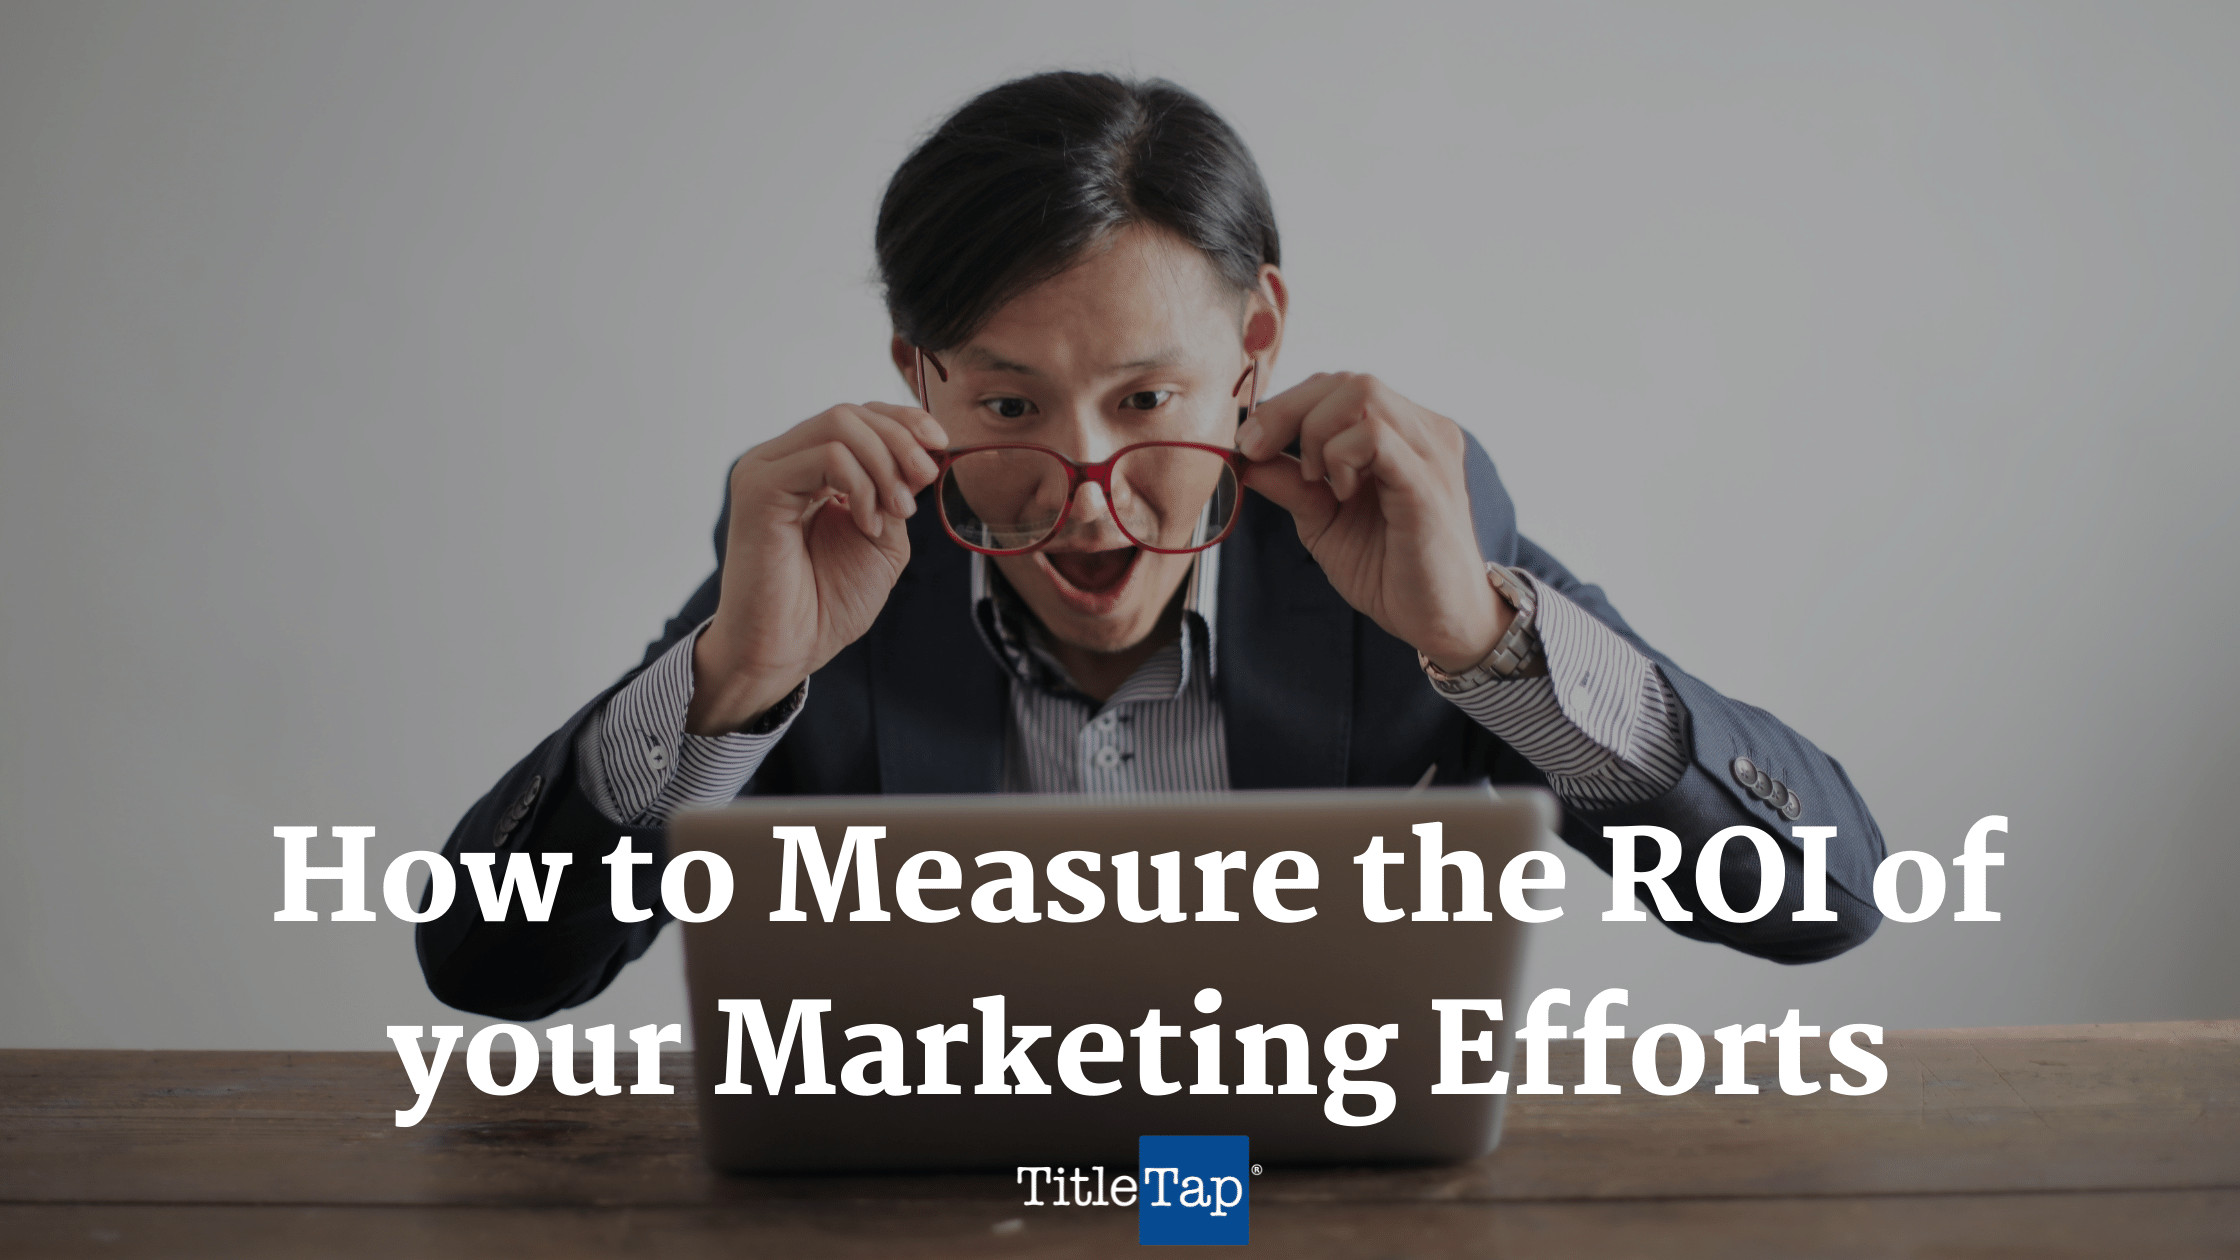 How to Measure the ROI of Your Marketing Efforts